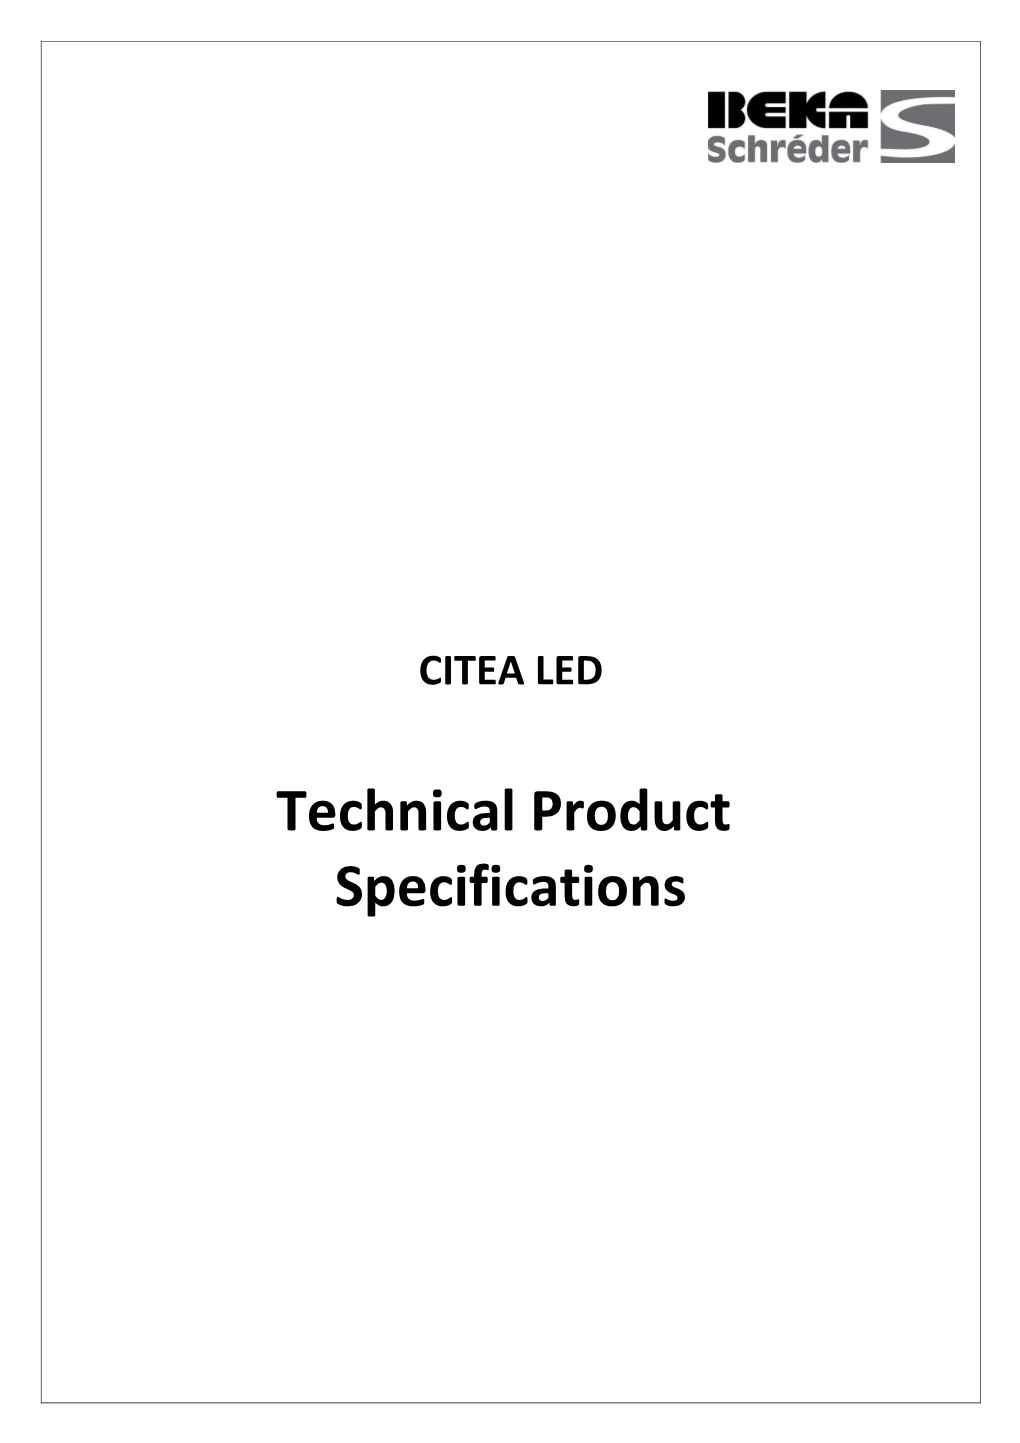 Technical Product Specifications - Template s2